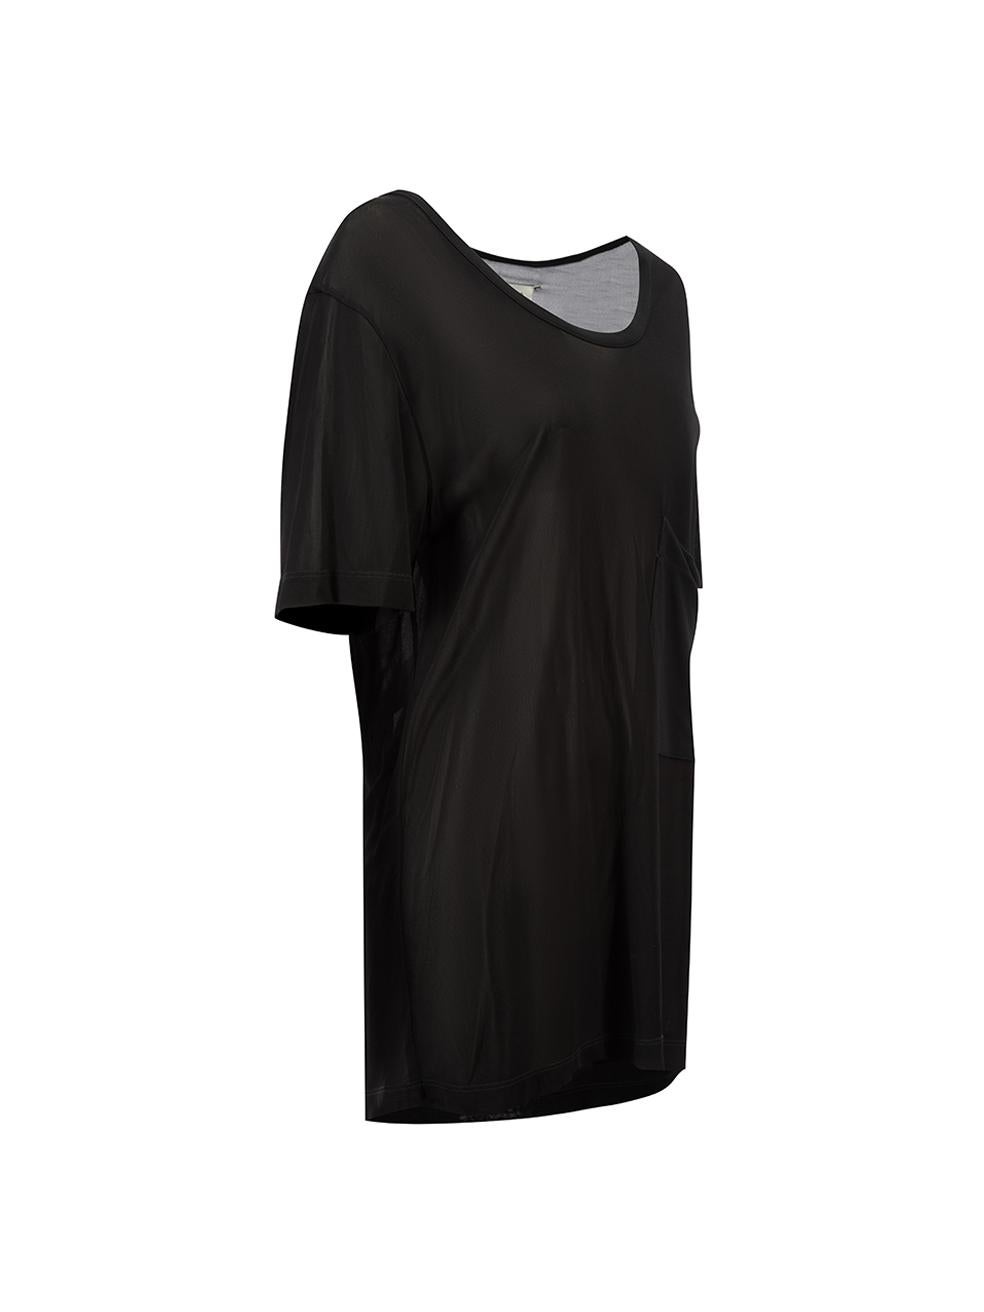 CONDITION is Very good. Minimal wear to top is evident. Minimal wear to the right-side of the neckline with a small hole to the mesh and light marks to the rear above the hem on this used Maison Margiela designer resale